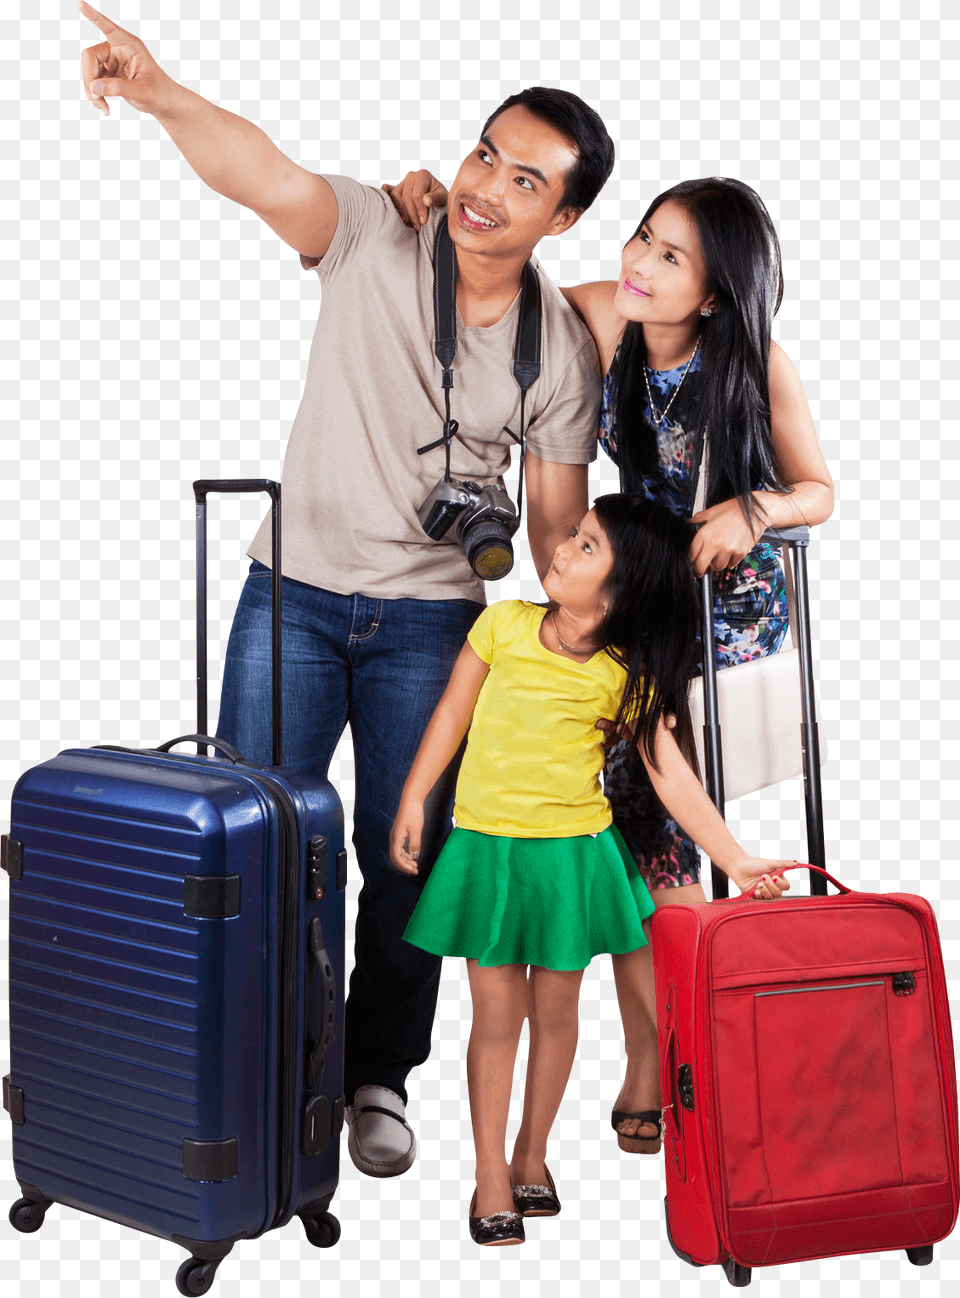 People Traveling People At The Airport, Skirt, Baggage, Clothing, Girl Png Image